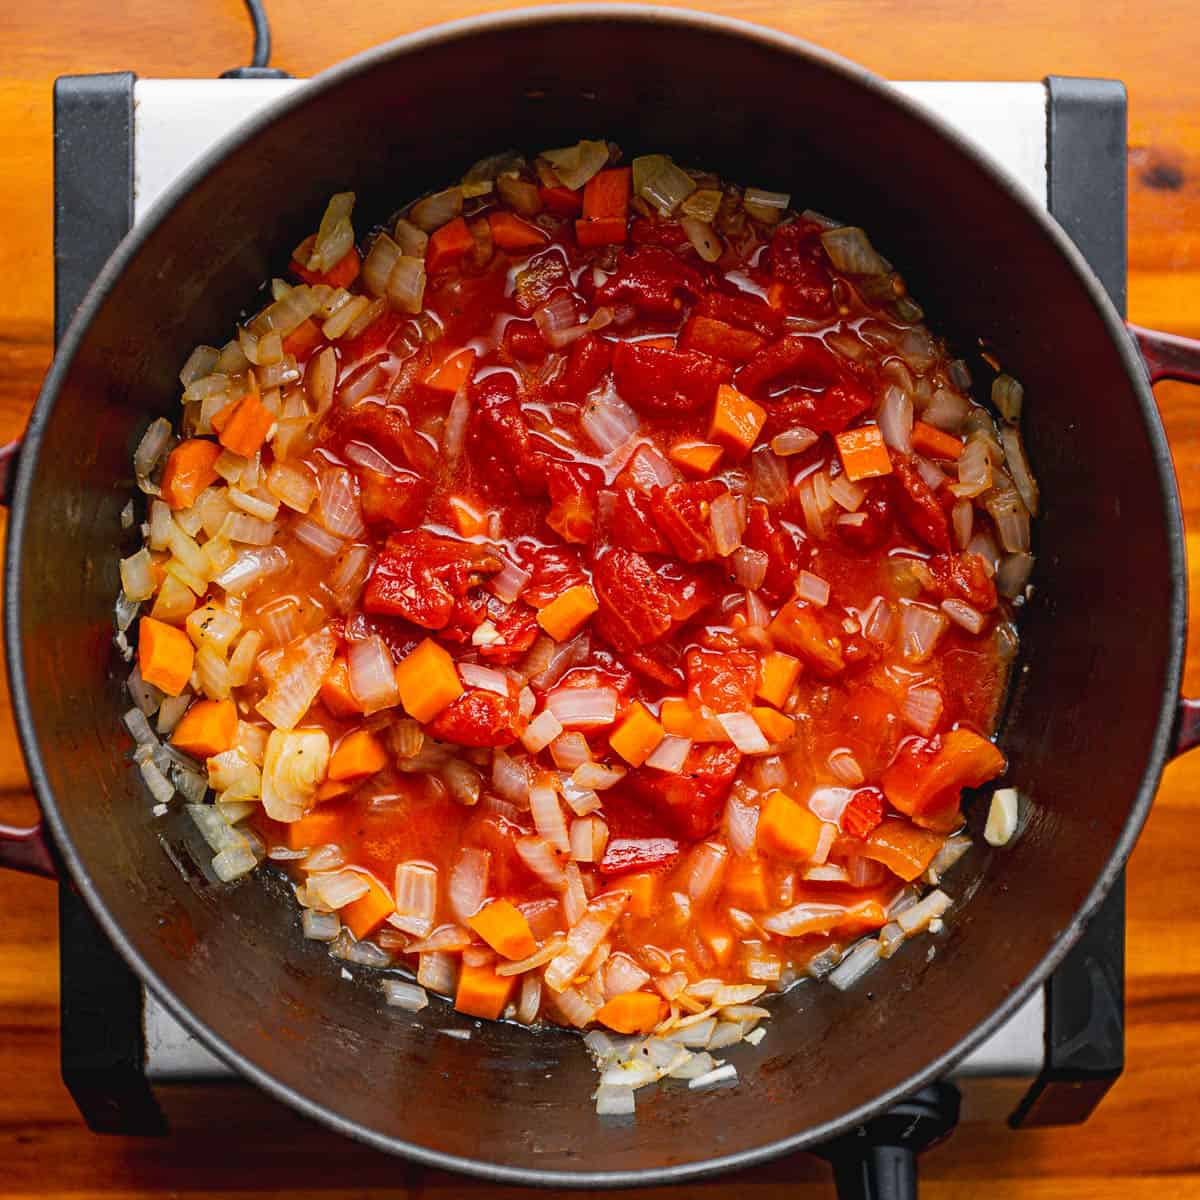 Add diced tomatoes, stir well, and simmer for 1 minute.